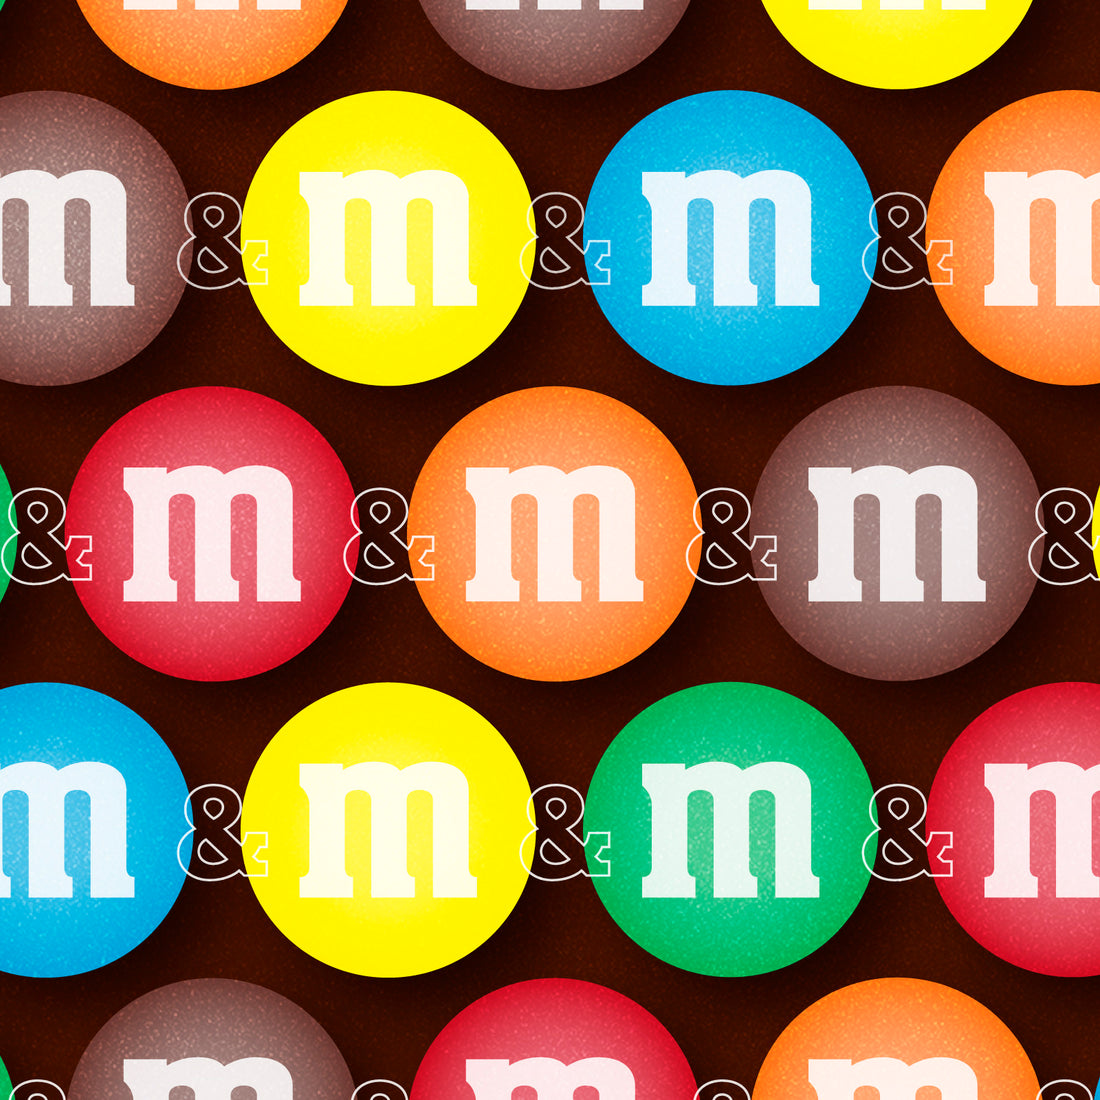 Which Of These Unique M&M's Flavors Would You Try?